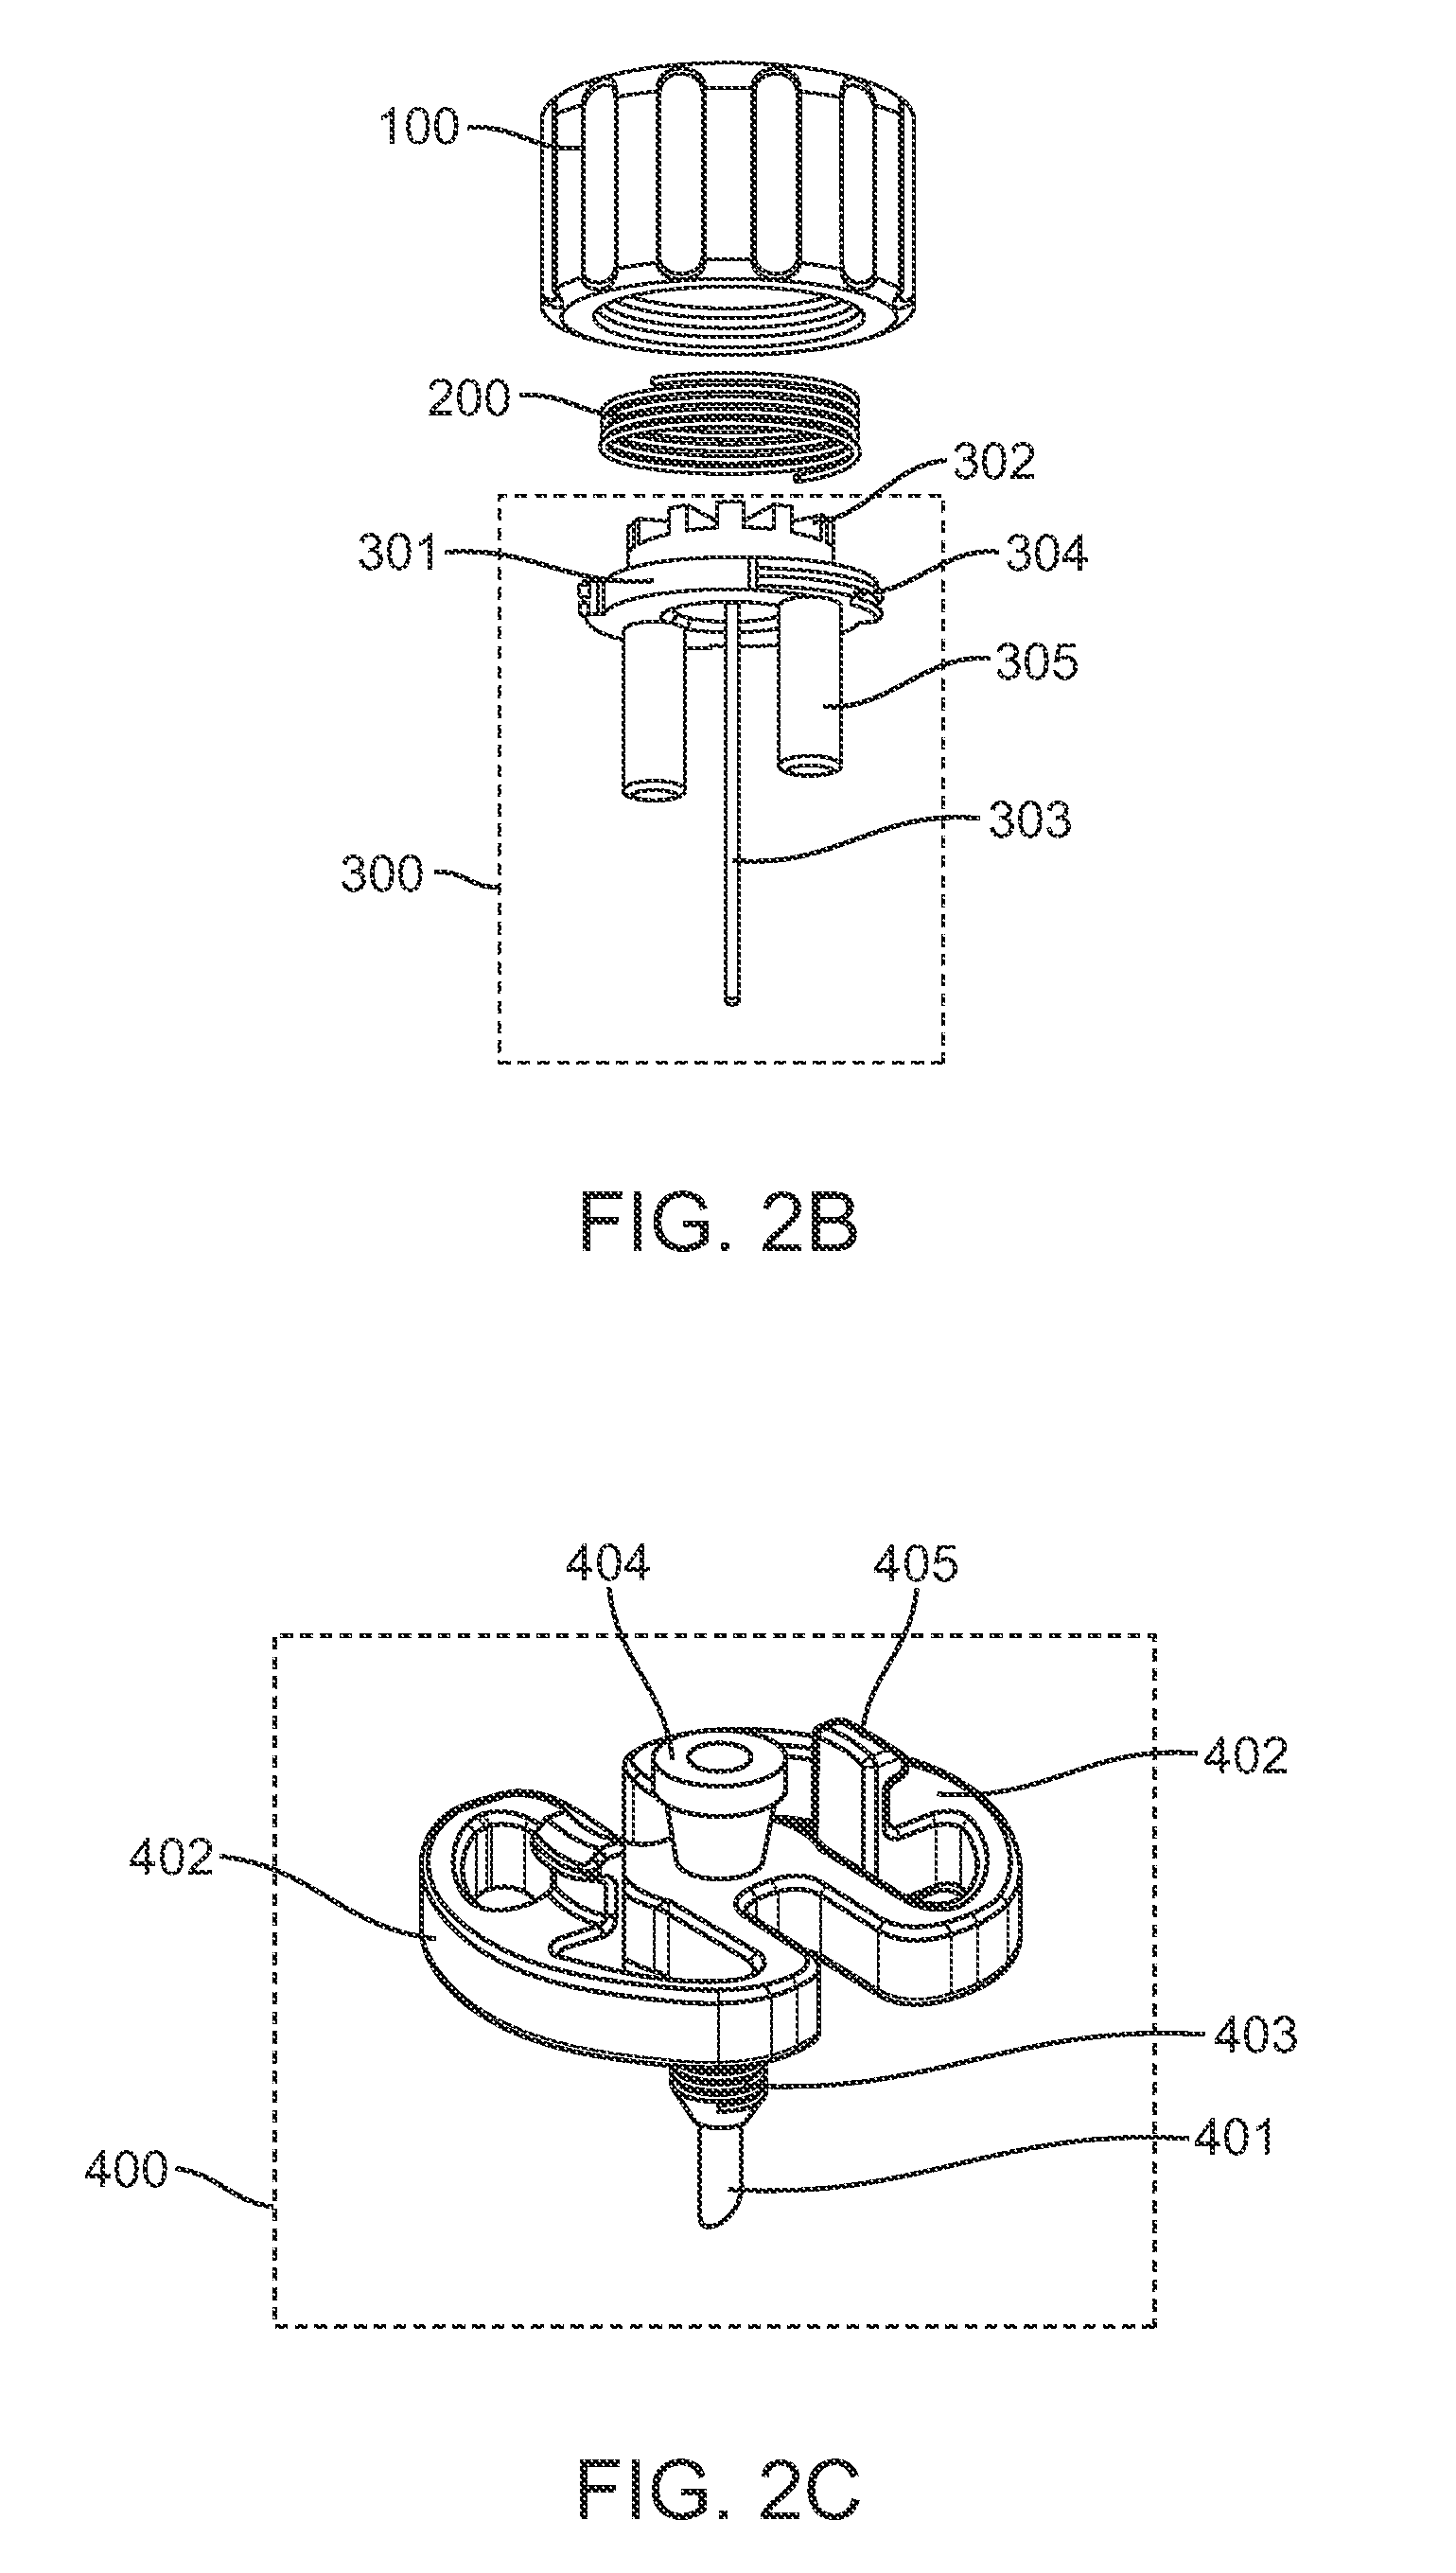 Devices and methods for safely accessing bone marrow and other tissues